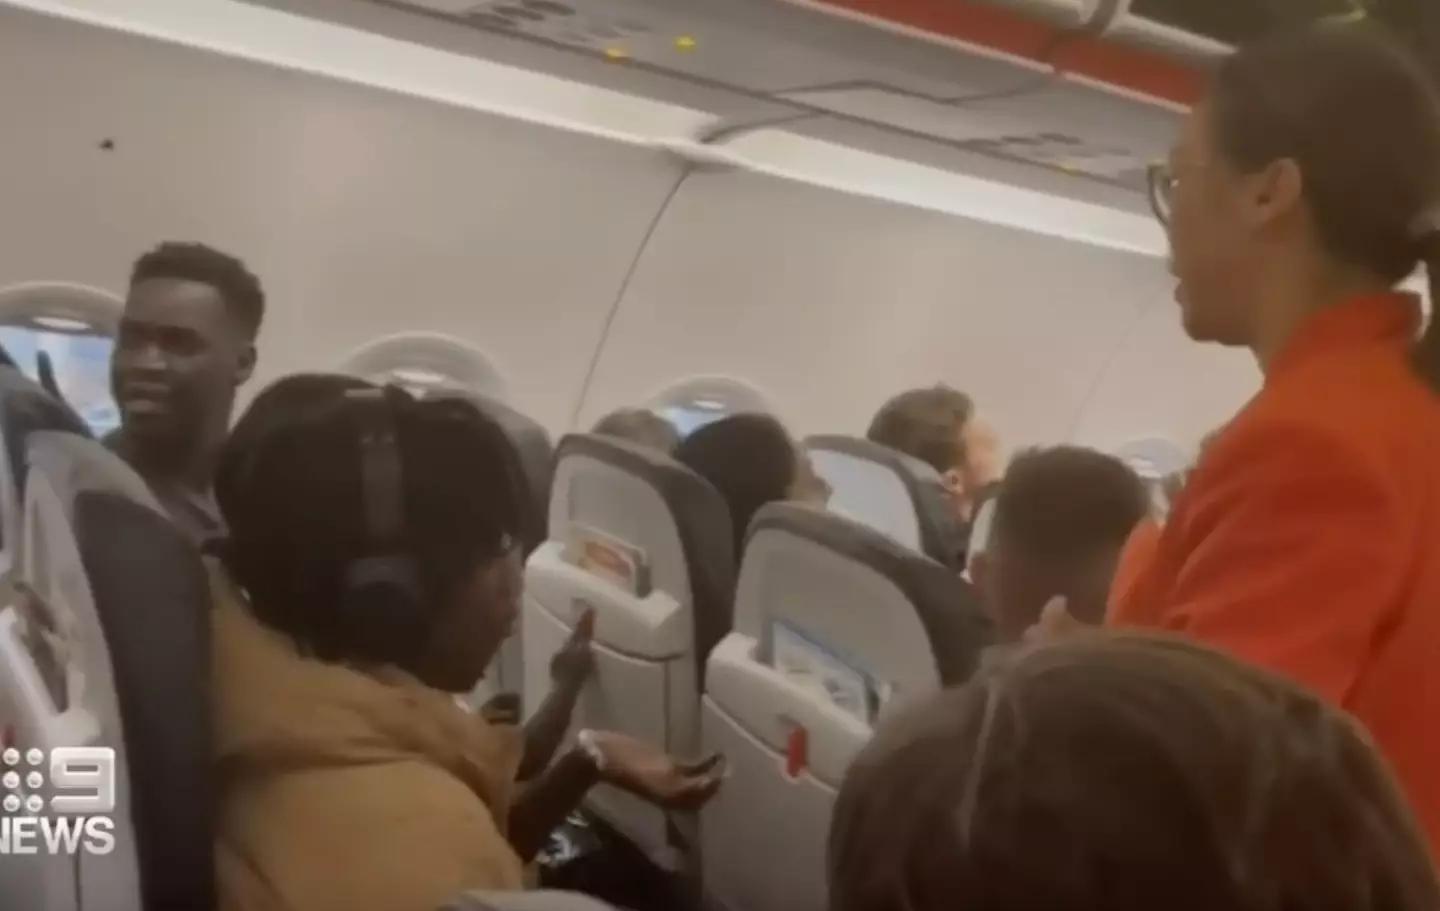 The dad claims a flight attendant told him it was fine for him to sit with his family.